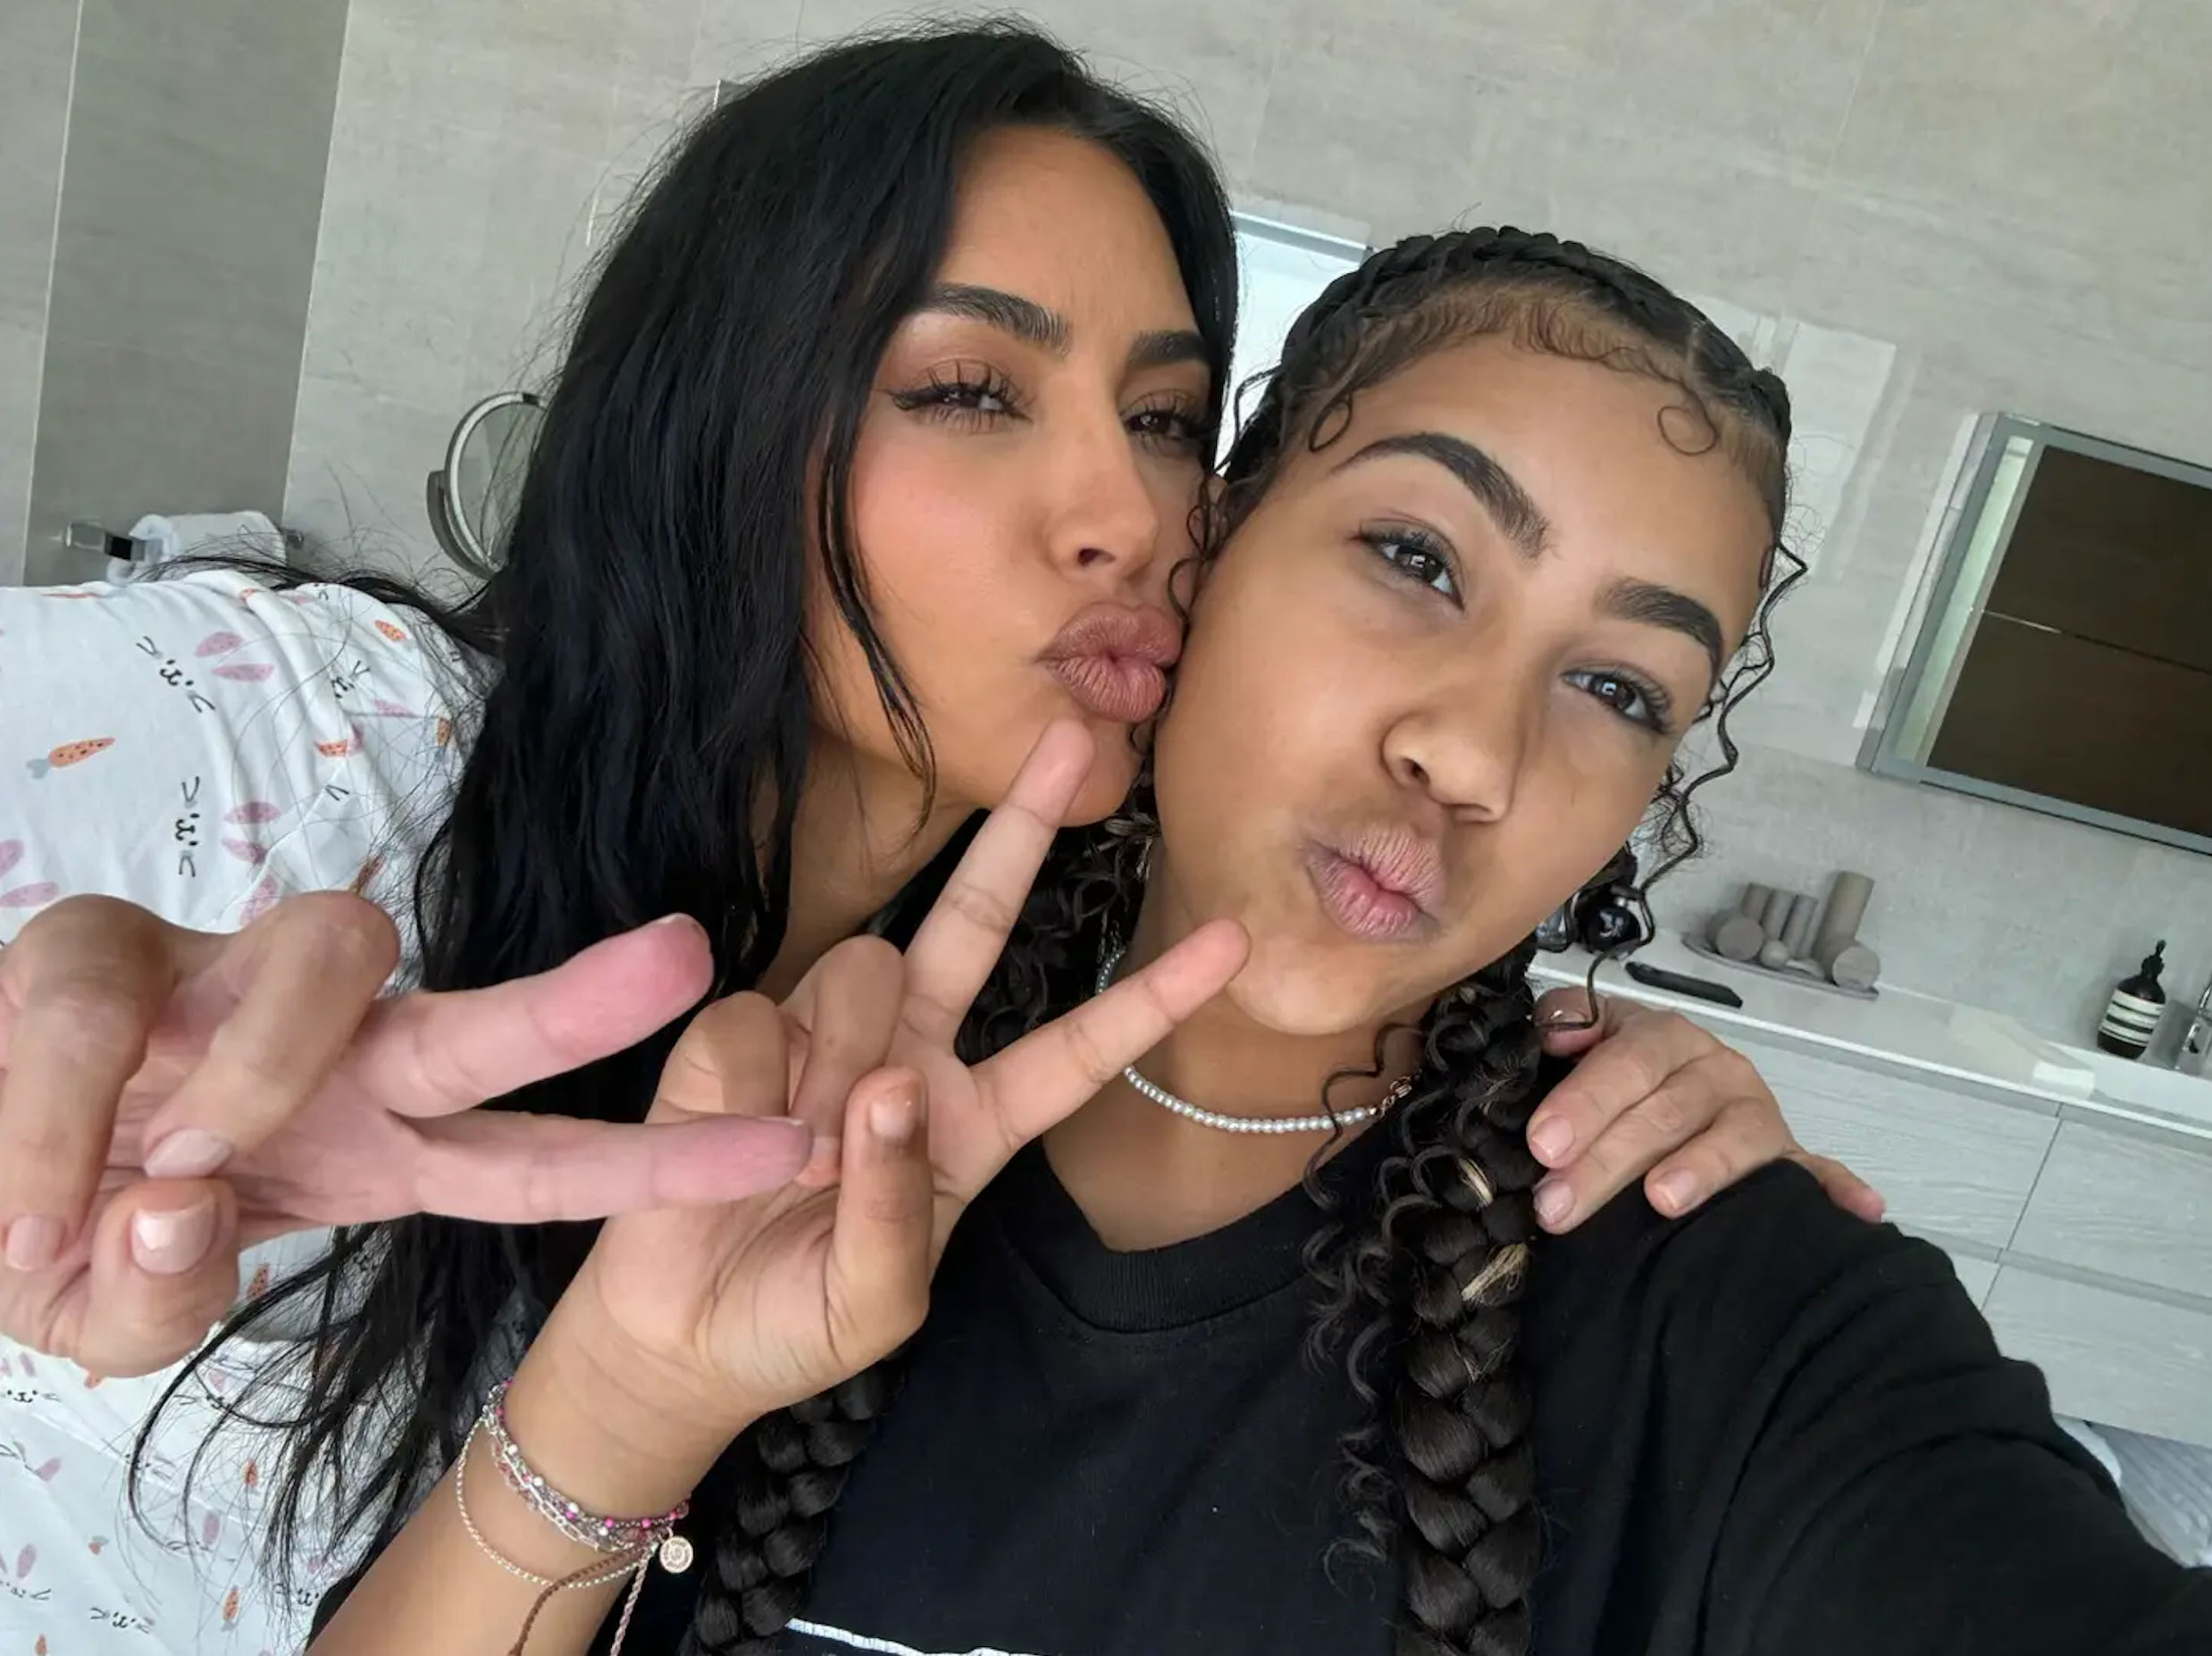 Fans have praised Bianca for her parenting of North and claimed the pre-teen has a closer bond with her than her mother, Kim Kardashian